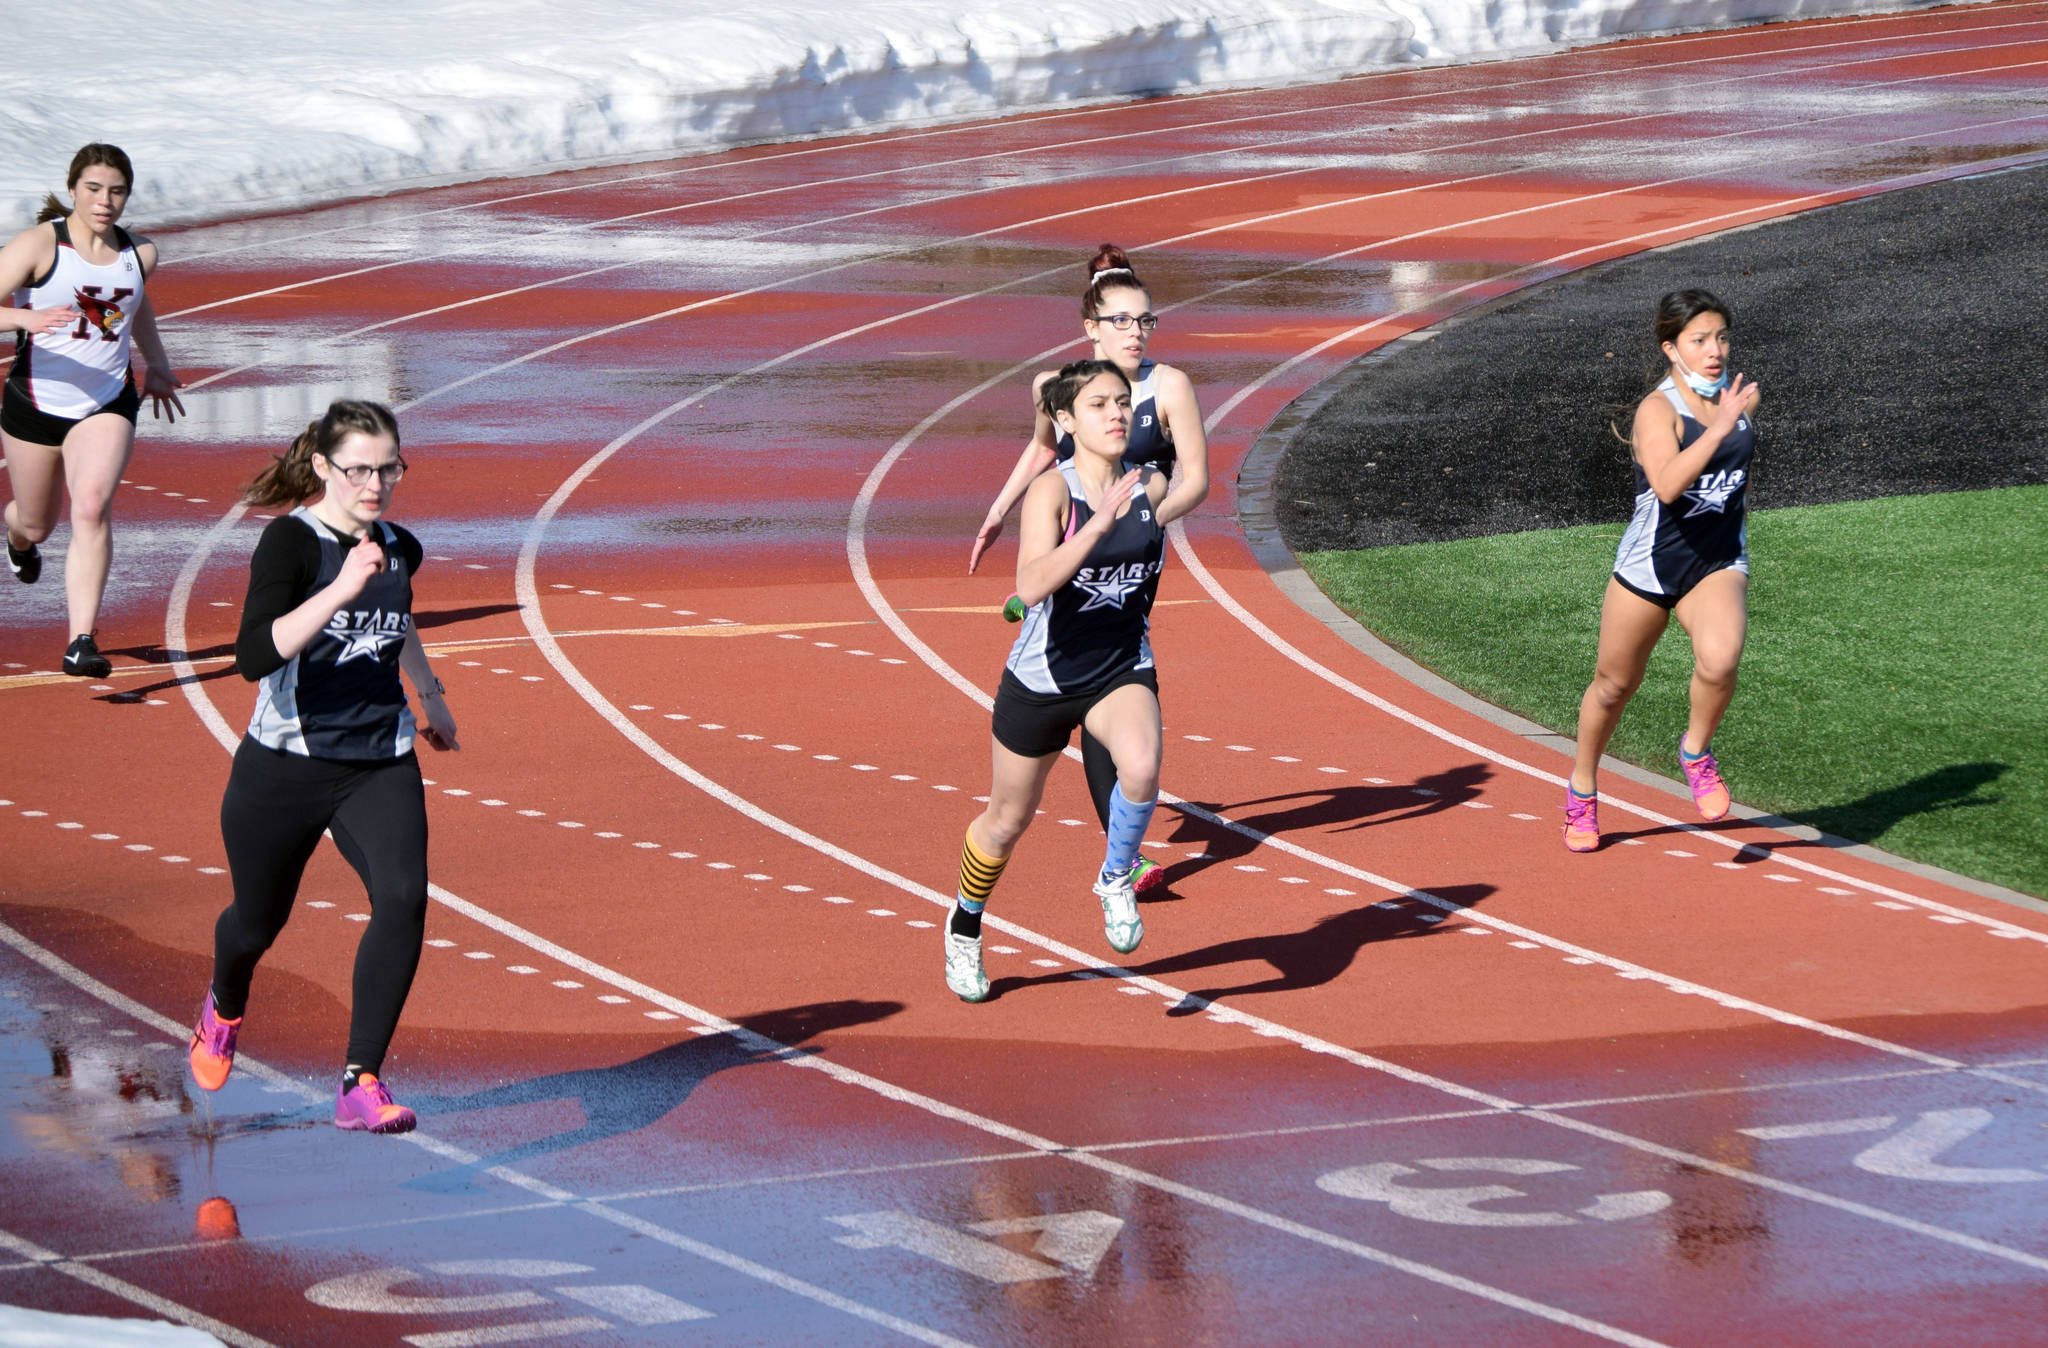 A heat of five runners competes in the 200-meter dash Friday in a dual meet between Kenai Central and Soldotna. Heats were limited to five runners due to the snow surrounding the track at Kenai Central High School in Kenai, Alaska. (Photo by Jeff Helminiak/Peninsula Clarion)